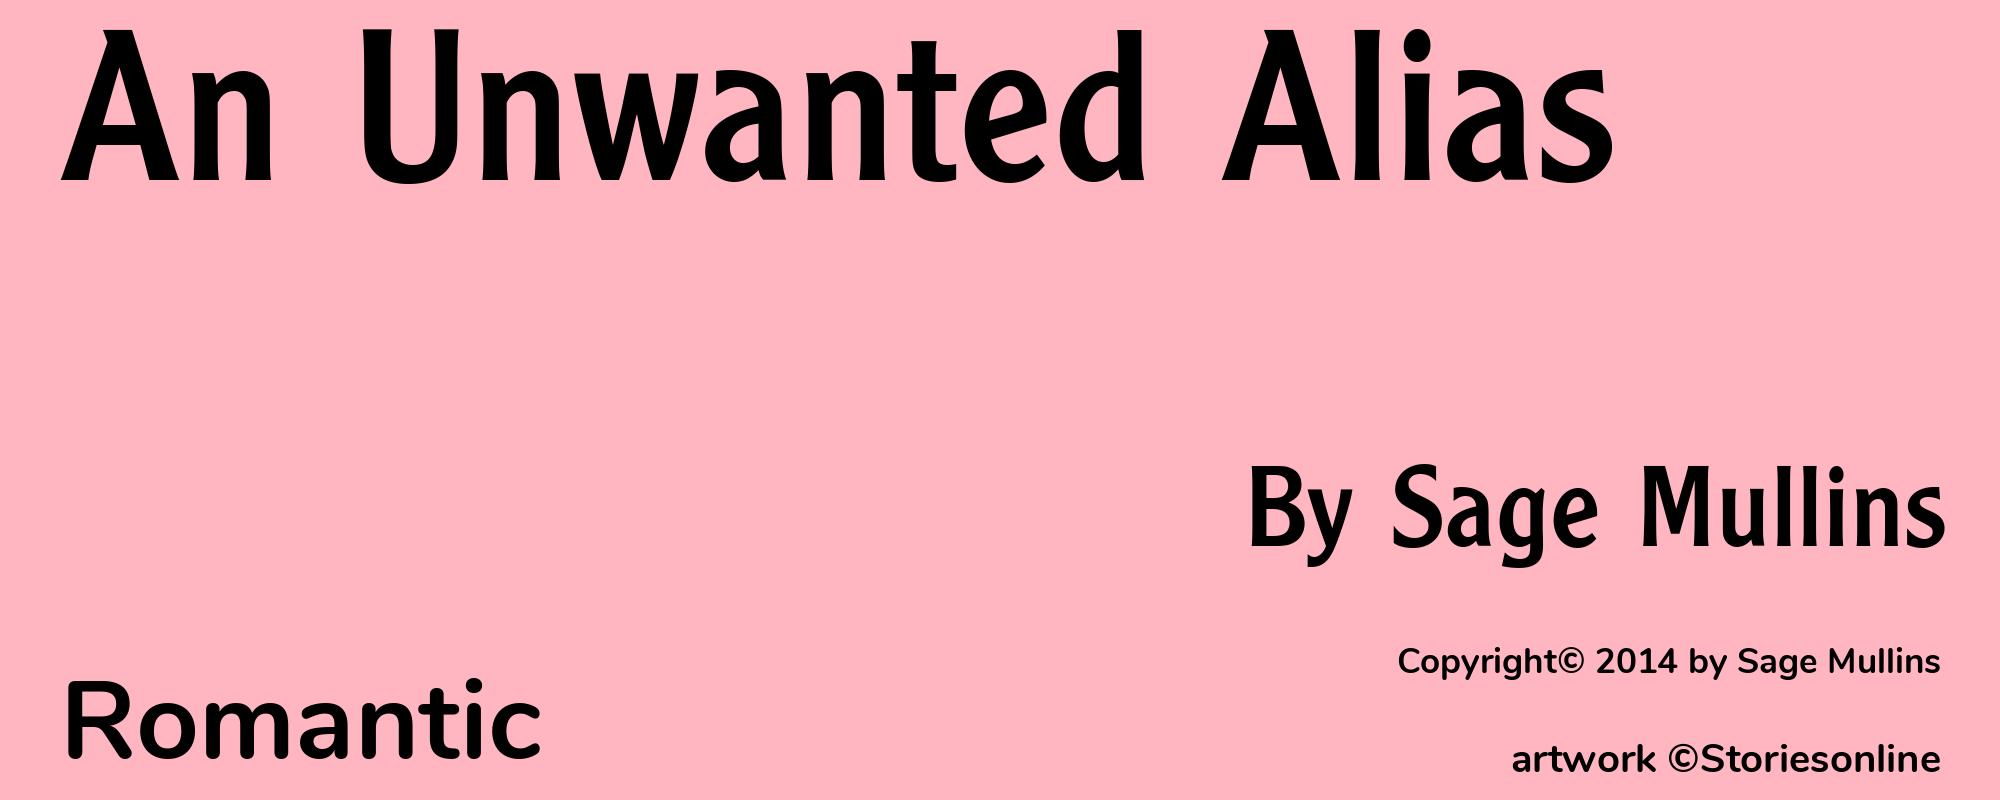 An Unwanted Alias - Cover